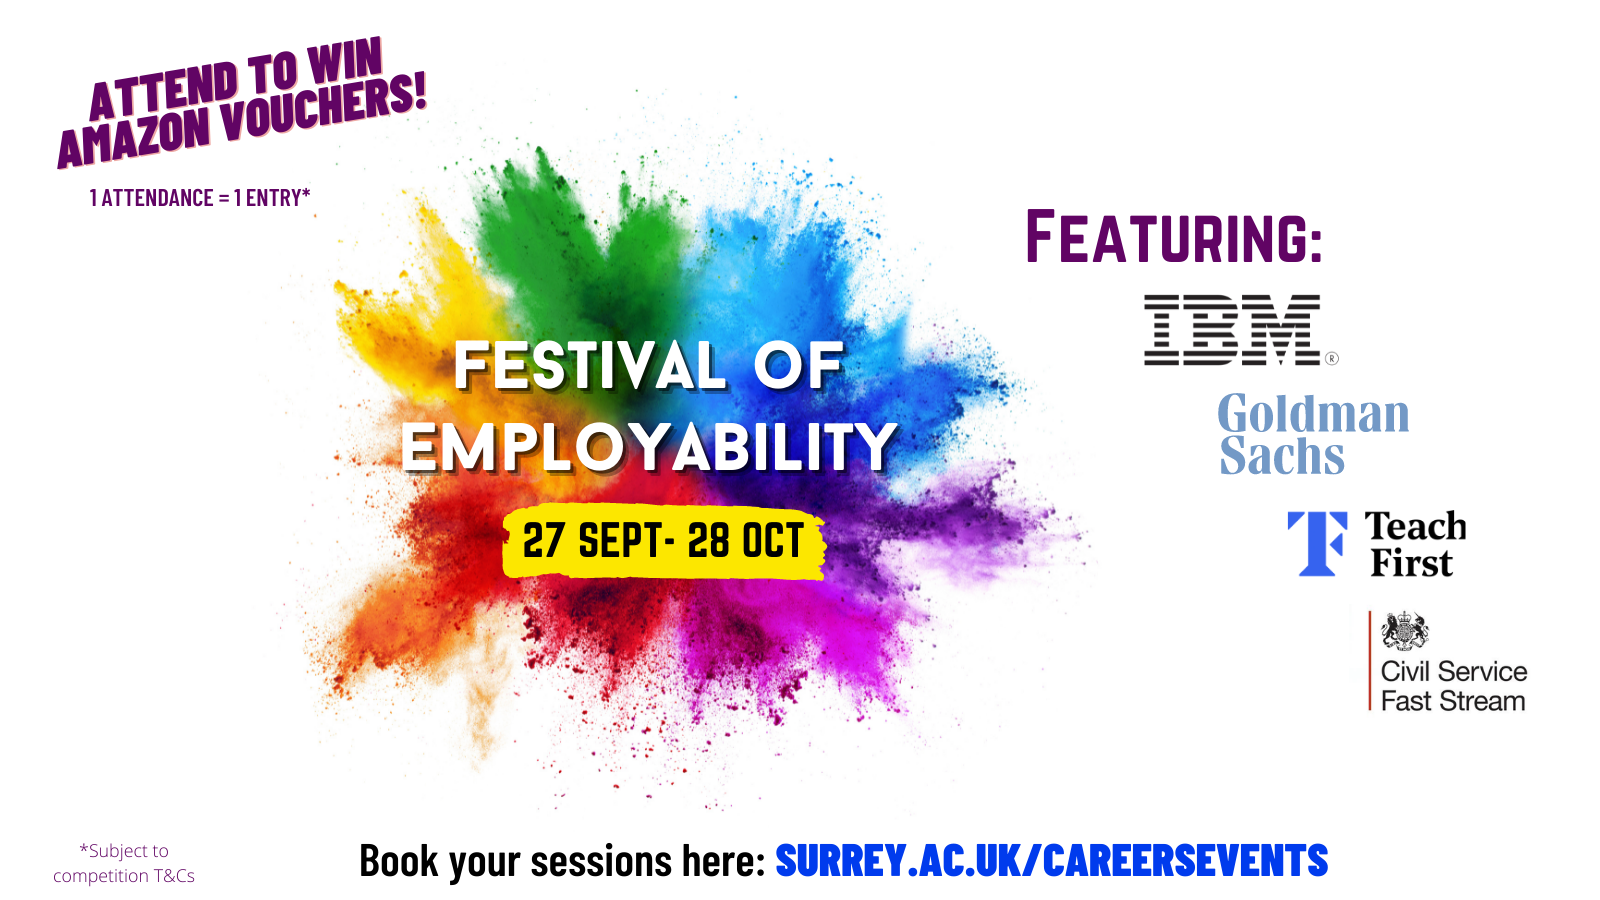 Image for the Festival of Employability - a paintsplash with wording and dates 27 Sept - 28 Oct over the top.